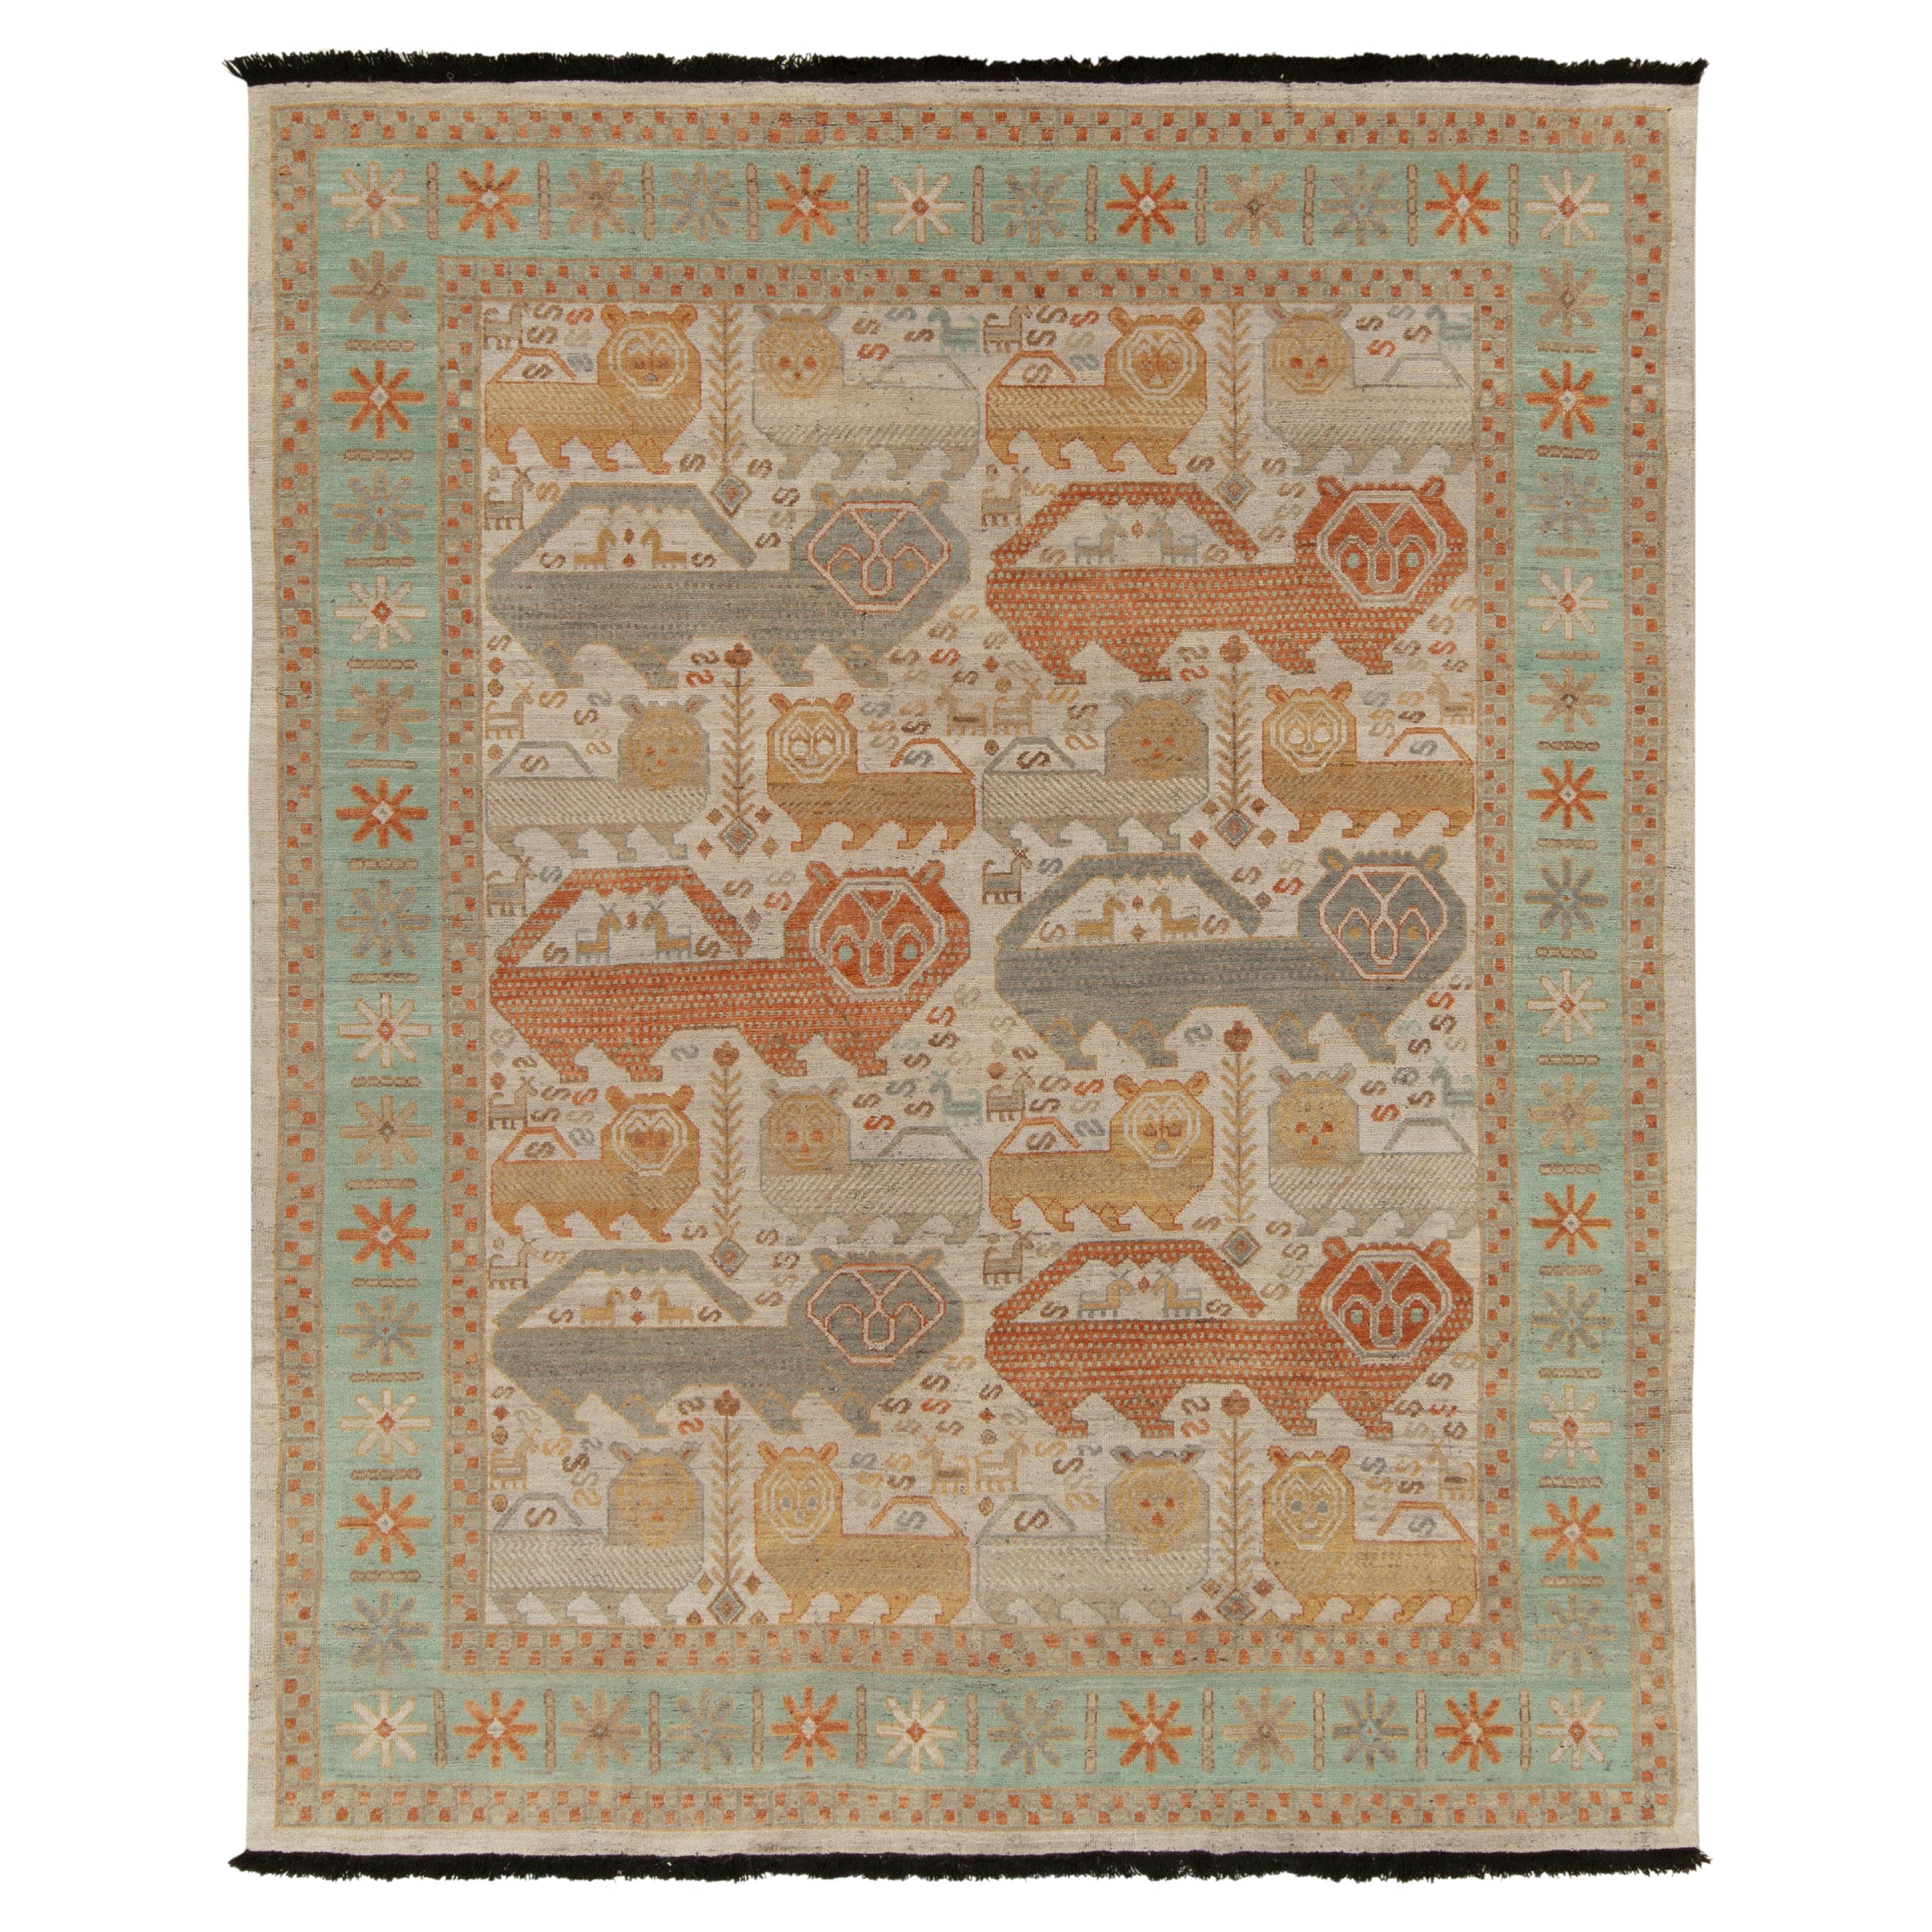 Rug & Kilim's Caucasian Style Rug in Orange, Gray, Green Pictorial Pattern For Sale